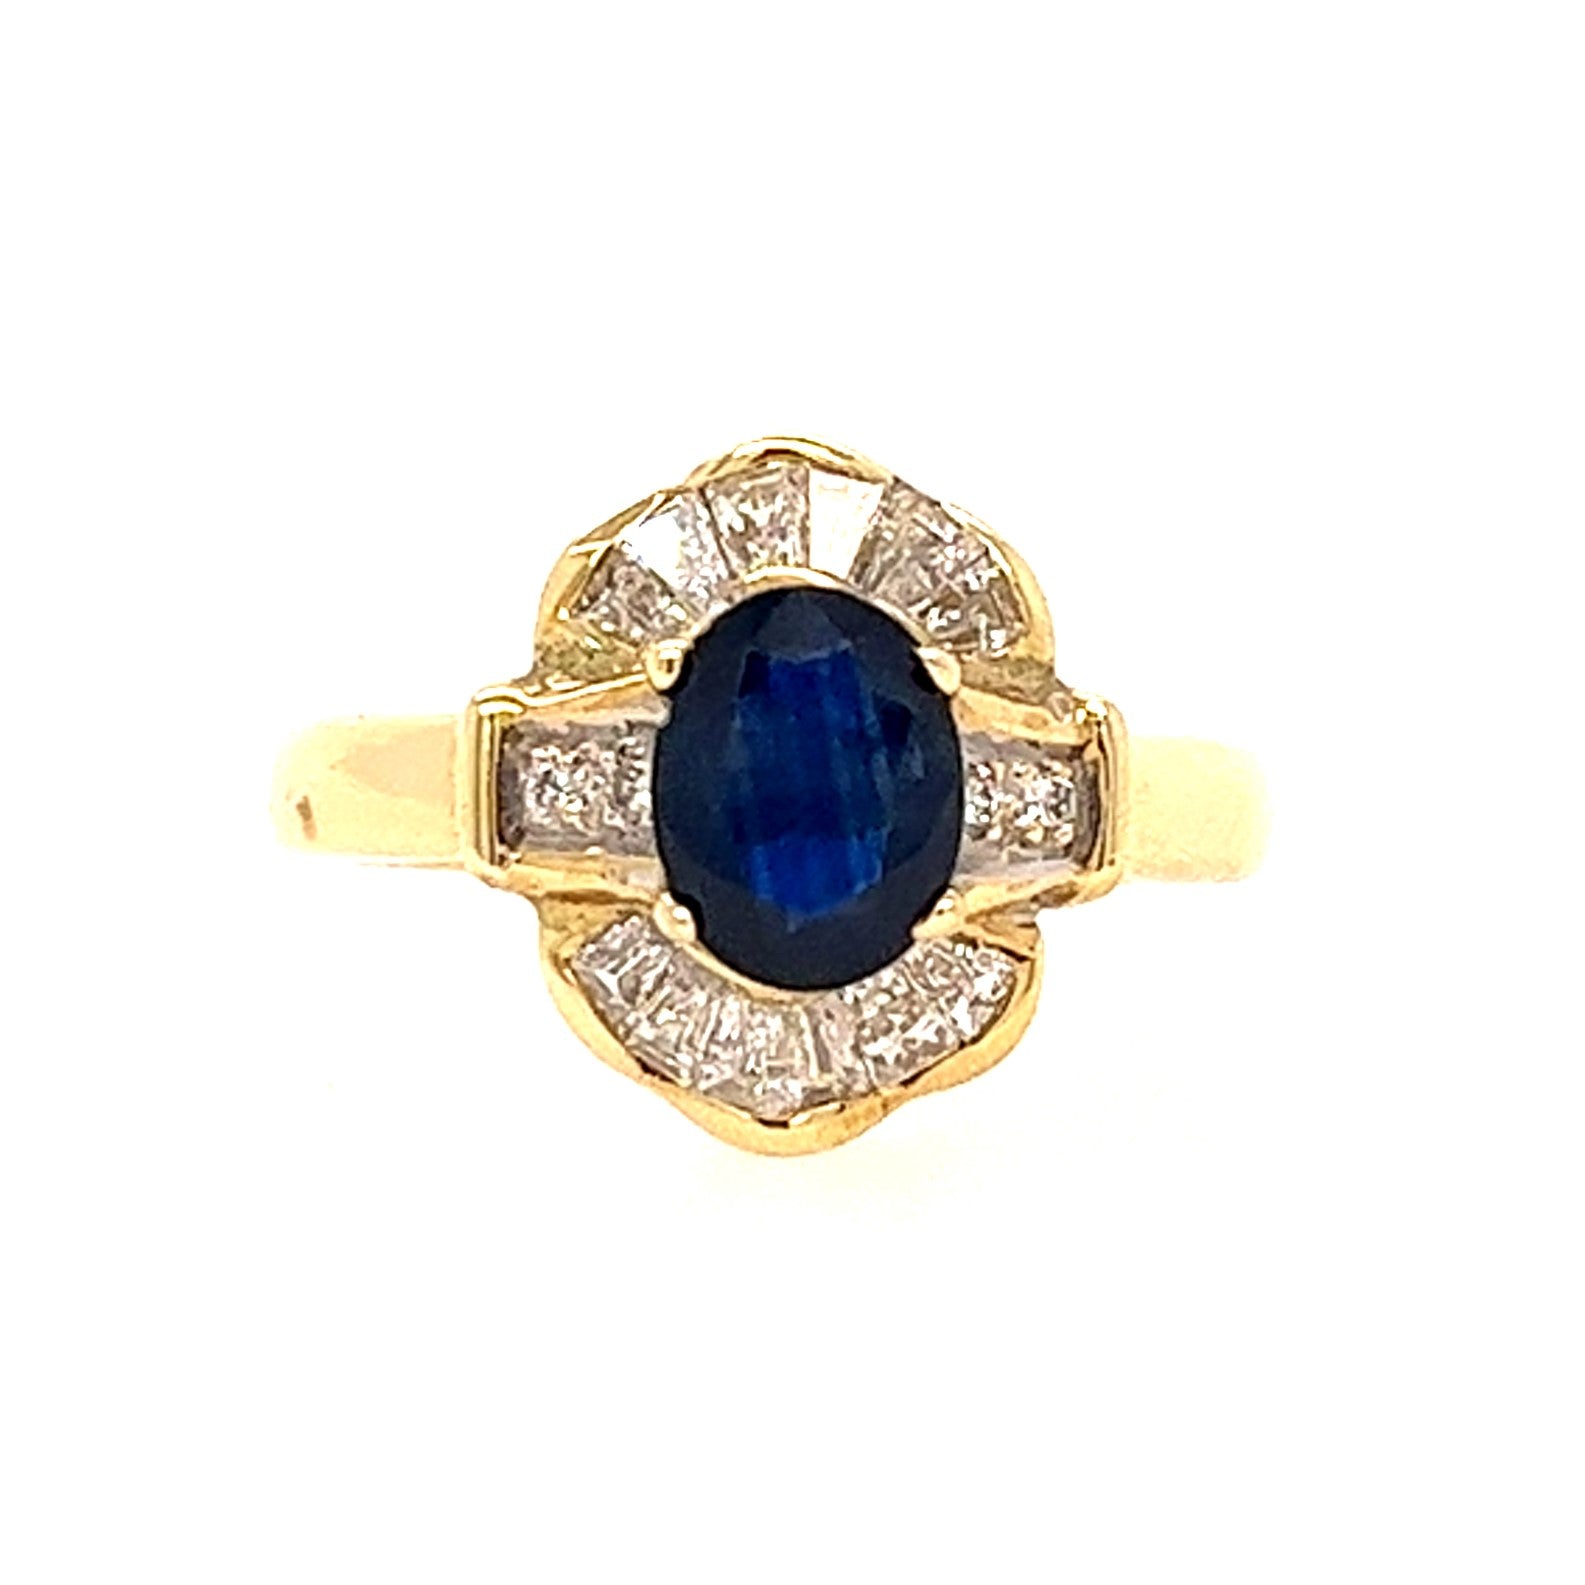 14KT YELLOW GOLD ANTIQUE DESIGN DIAMOND AND SAPPHIRE RING